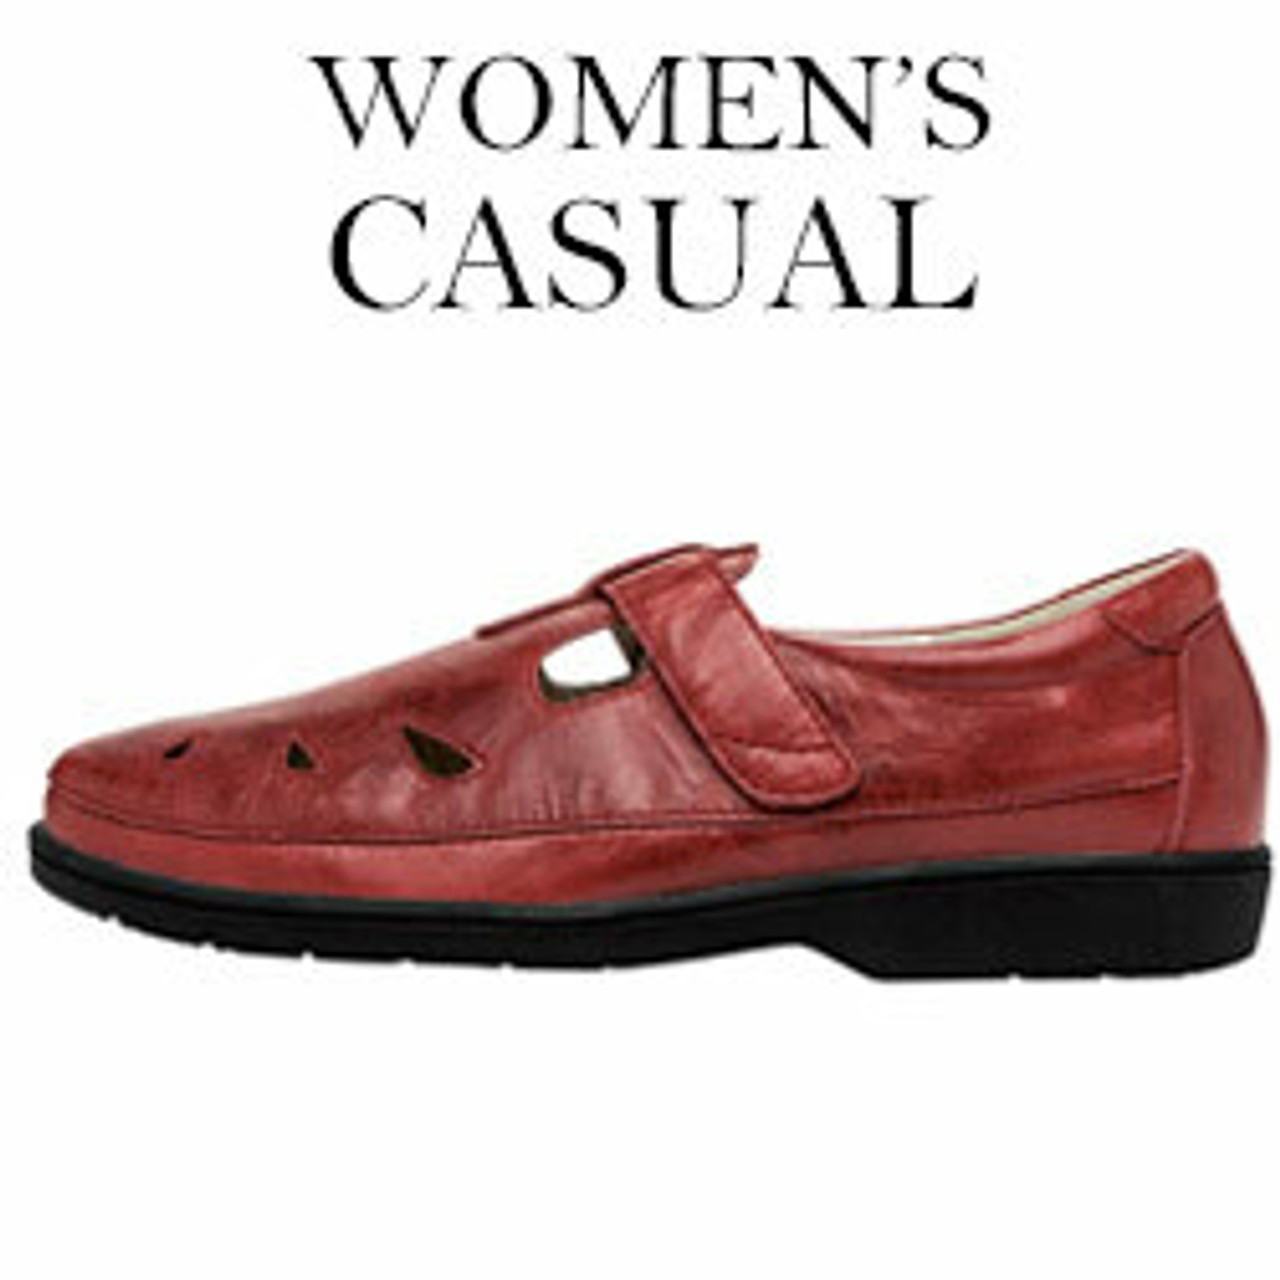 Orthopedic Casual Shoes For Women